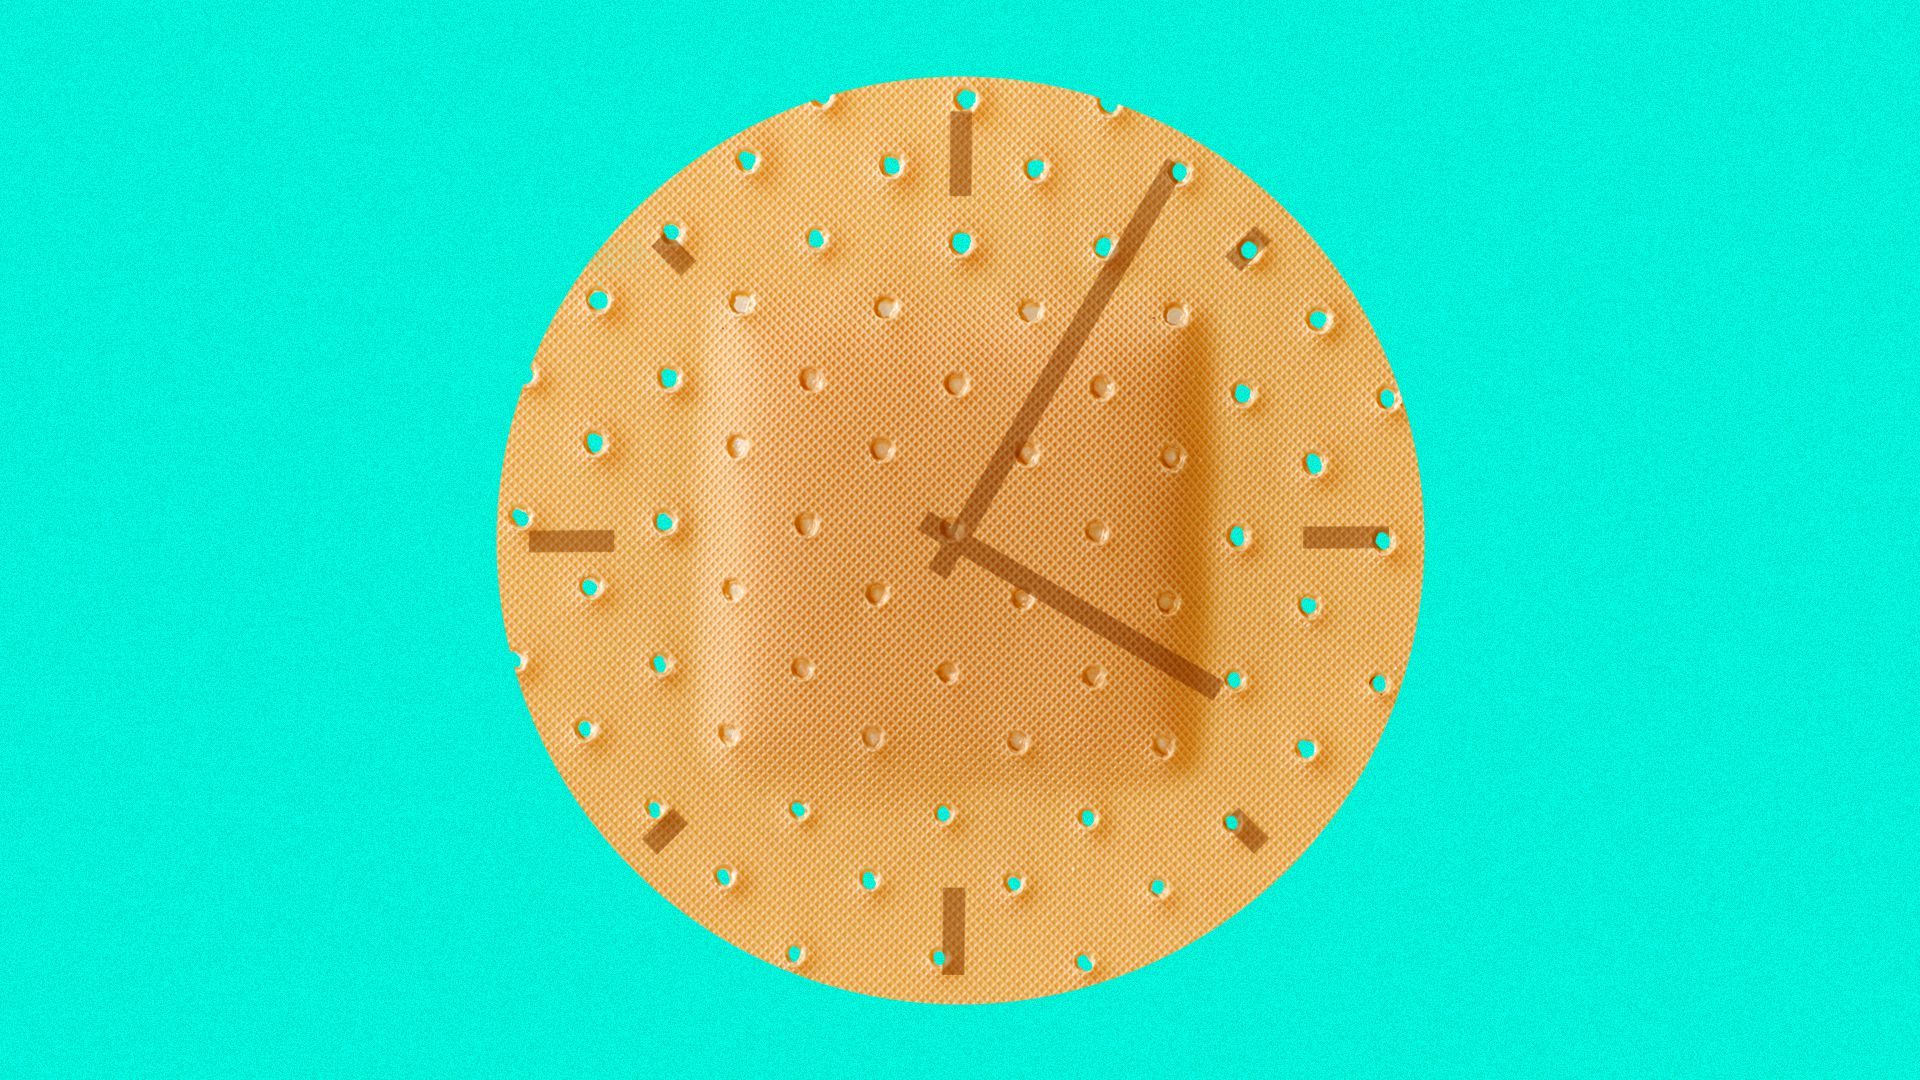 Illustration of a circular bandage with a clock face on it.